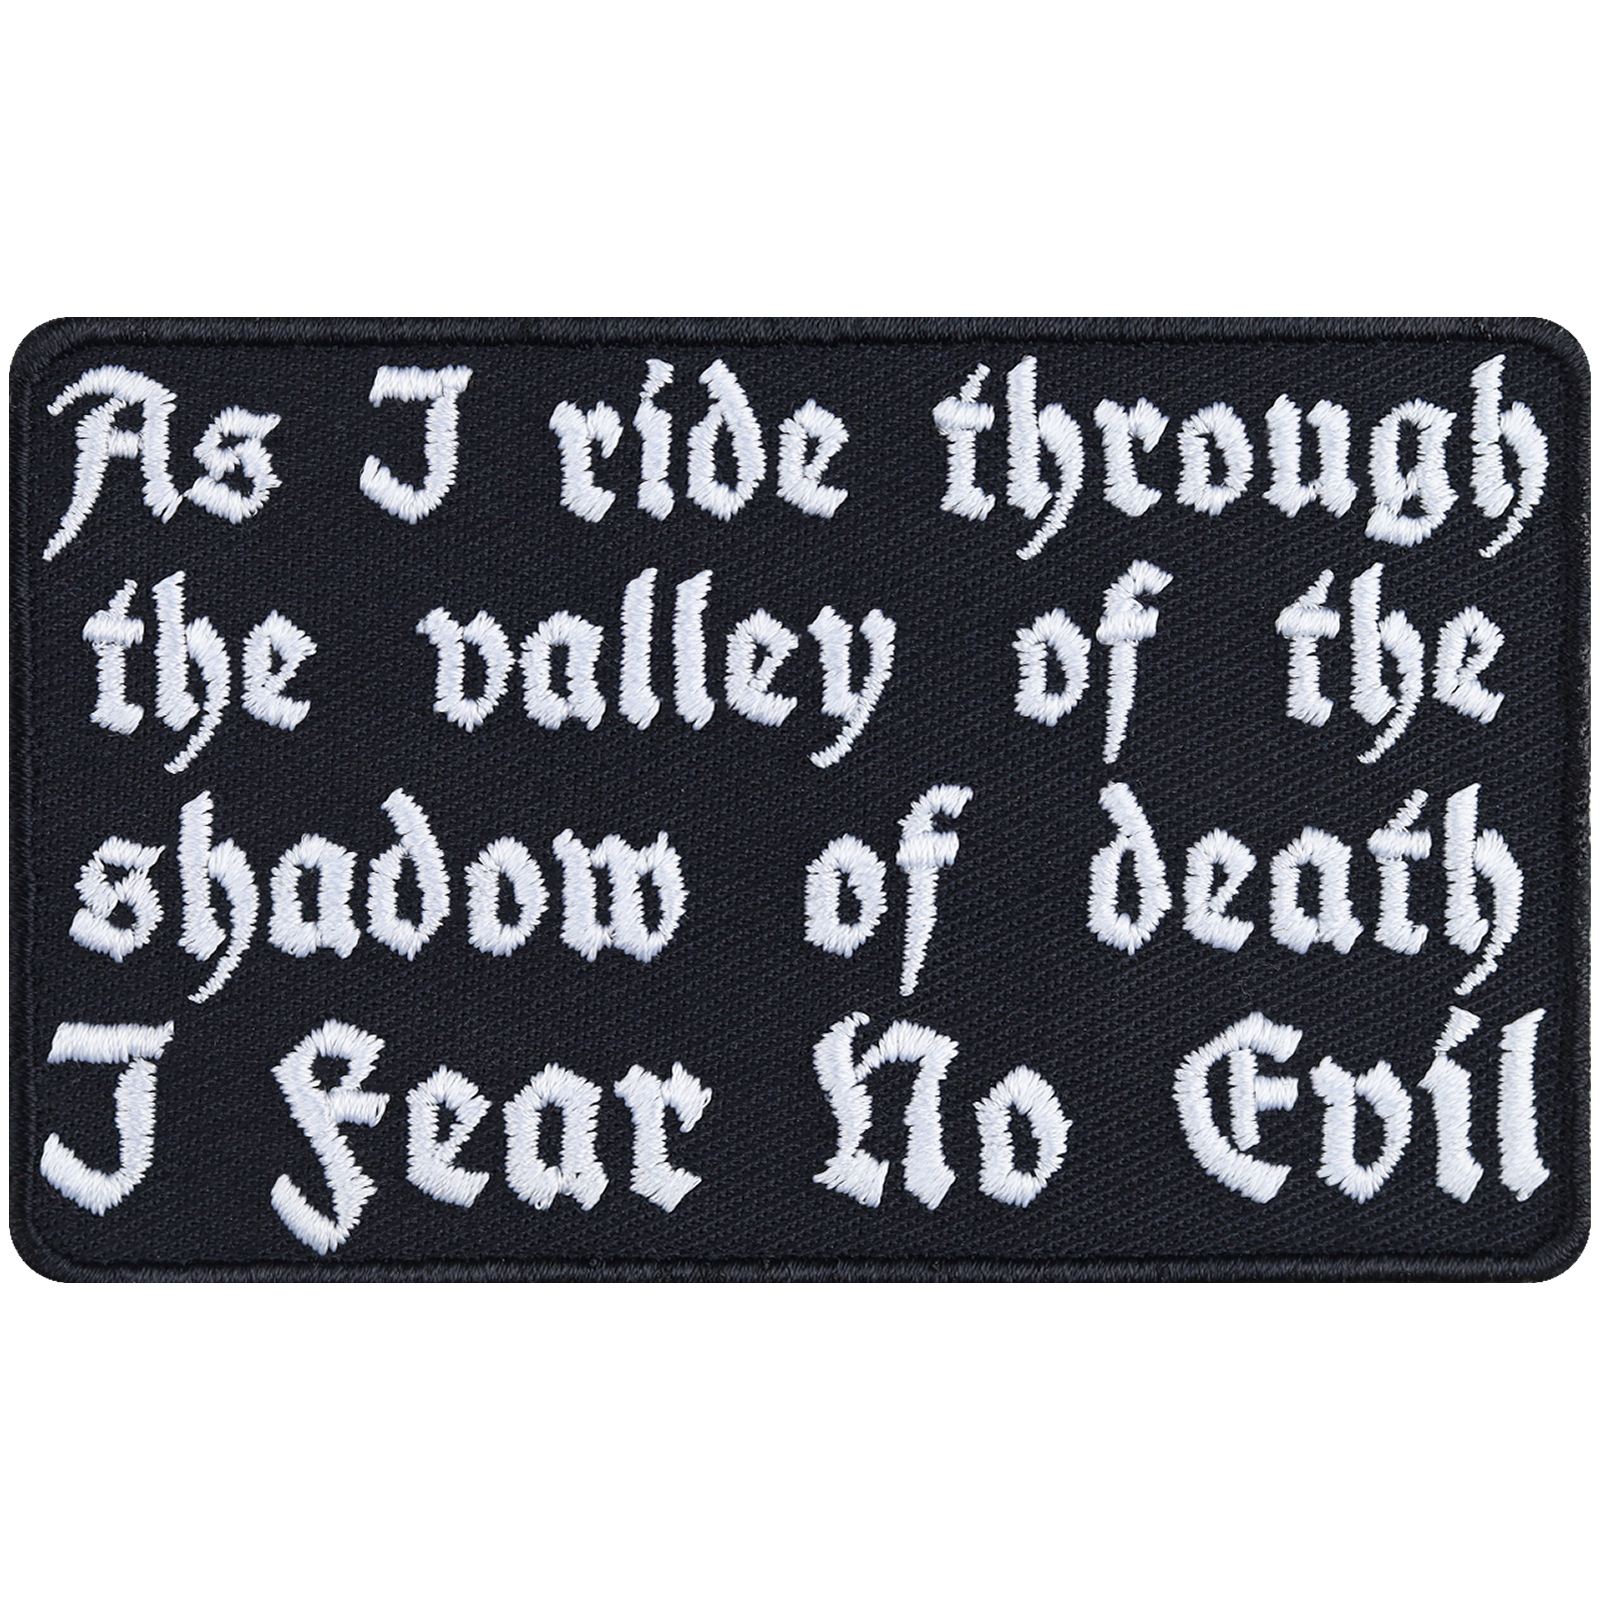 As I ride through the valley of the shadow of death I fear no evil - Patch